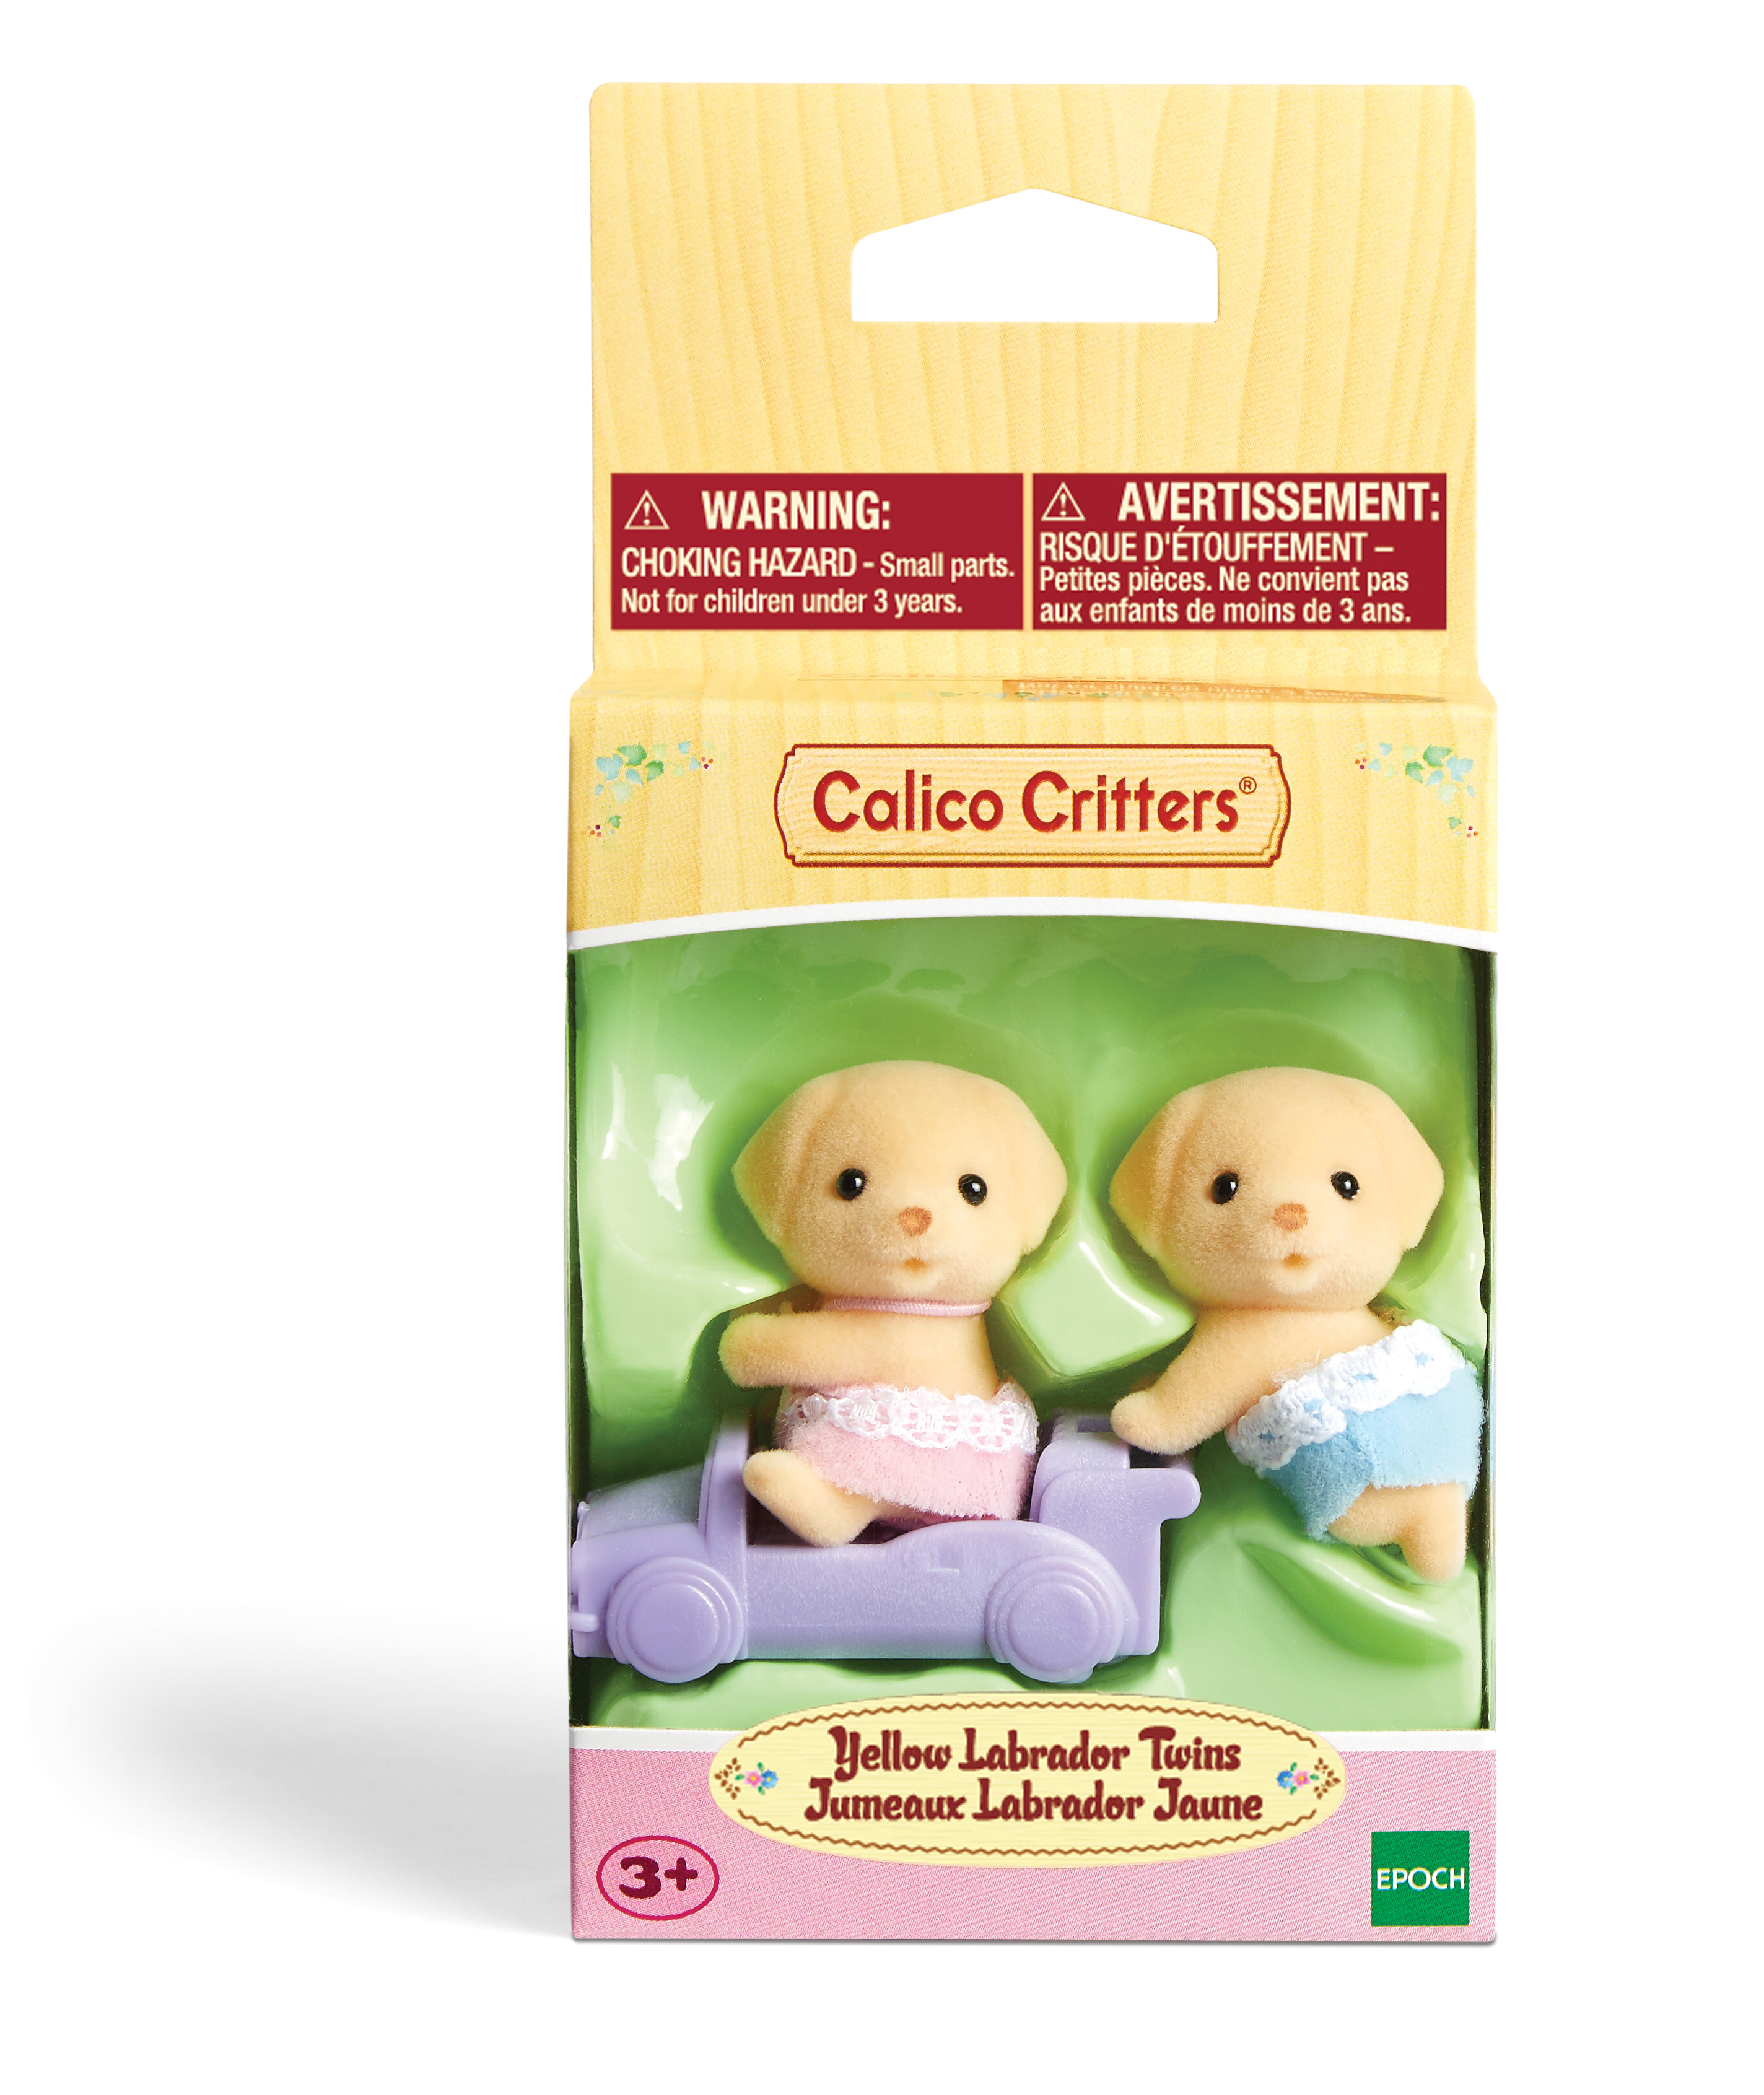 Calico Critters - Yellow Labrador Twins - image 2 of 4